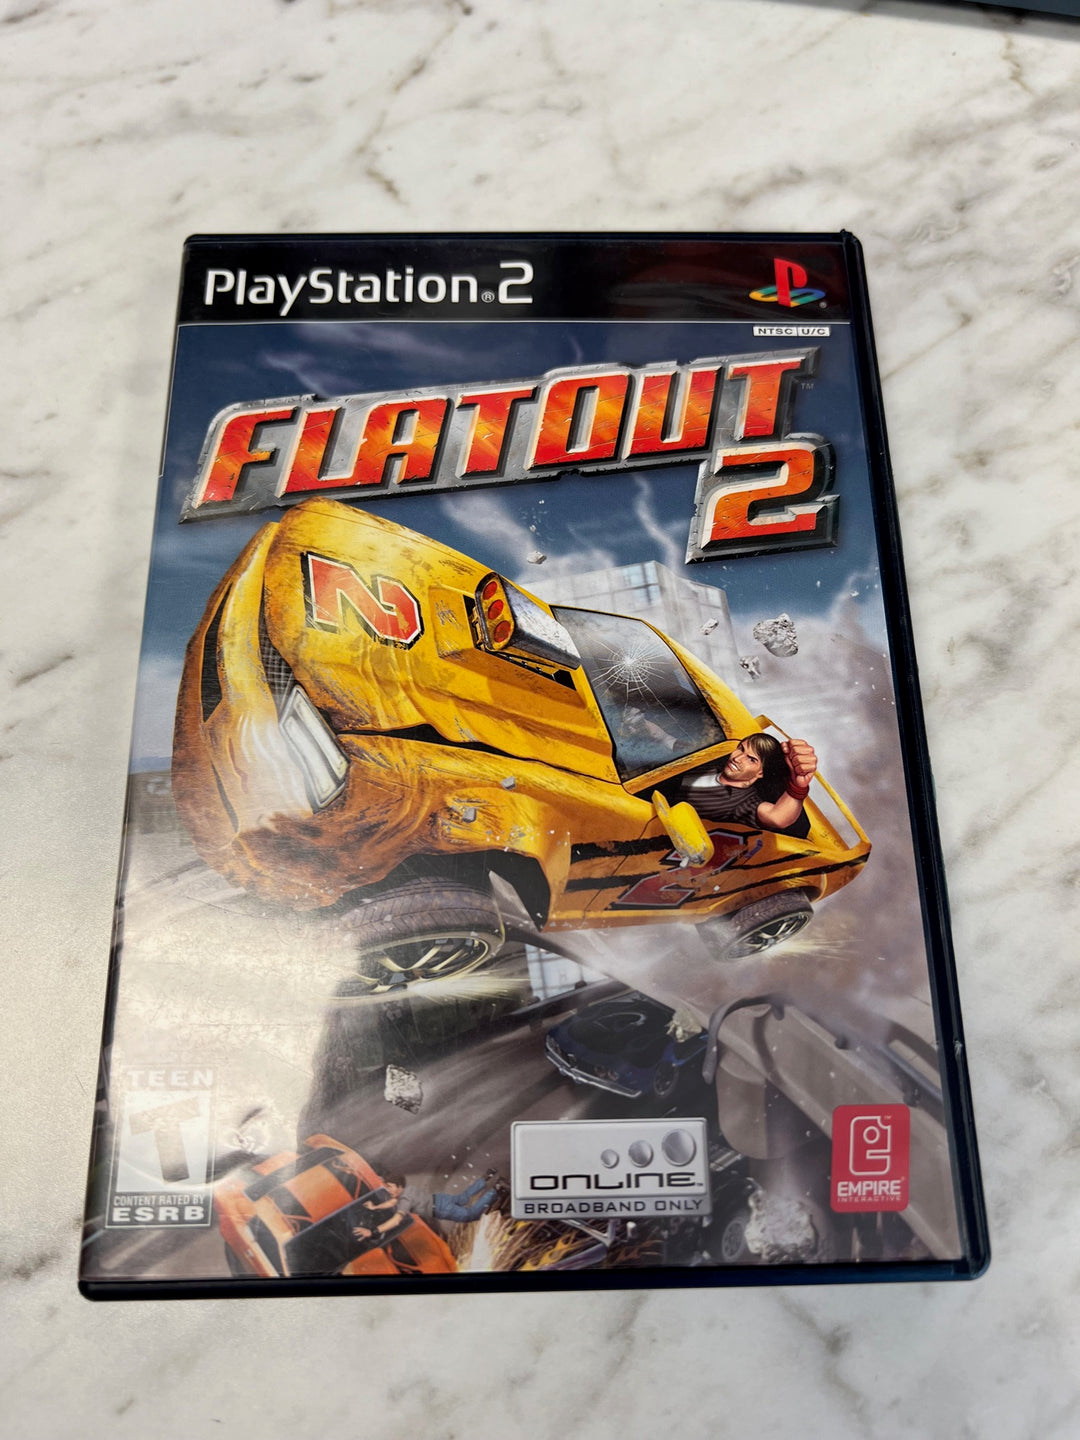 Flatout 2 for PS2 Playstation 2 Case Only No Game DU62724